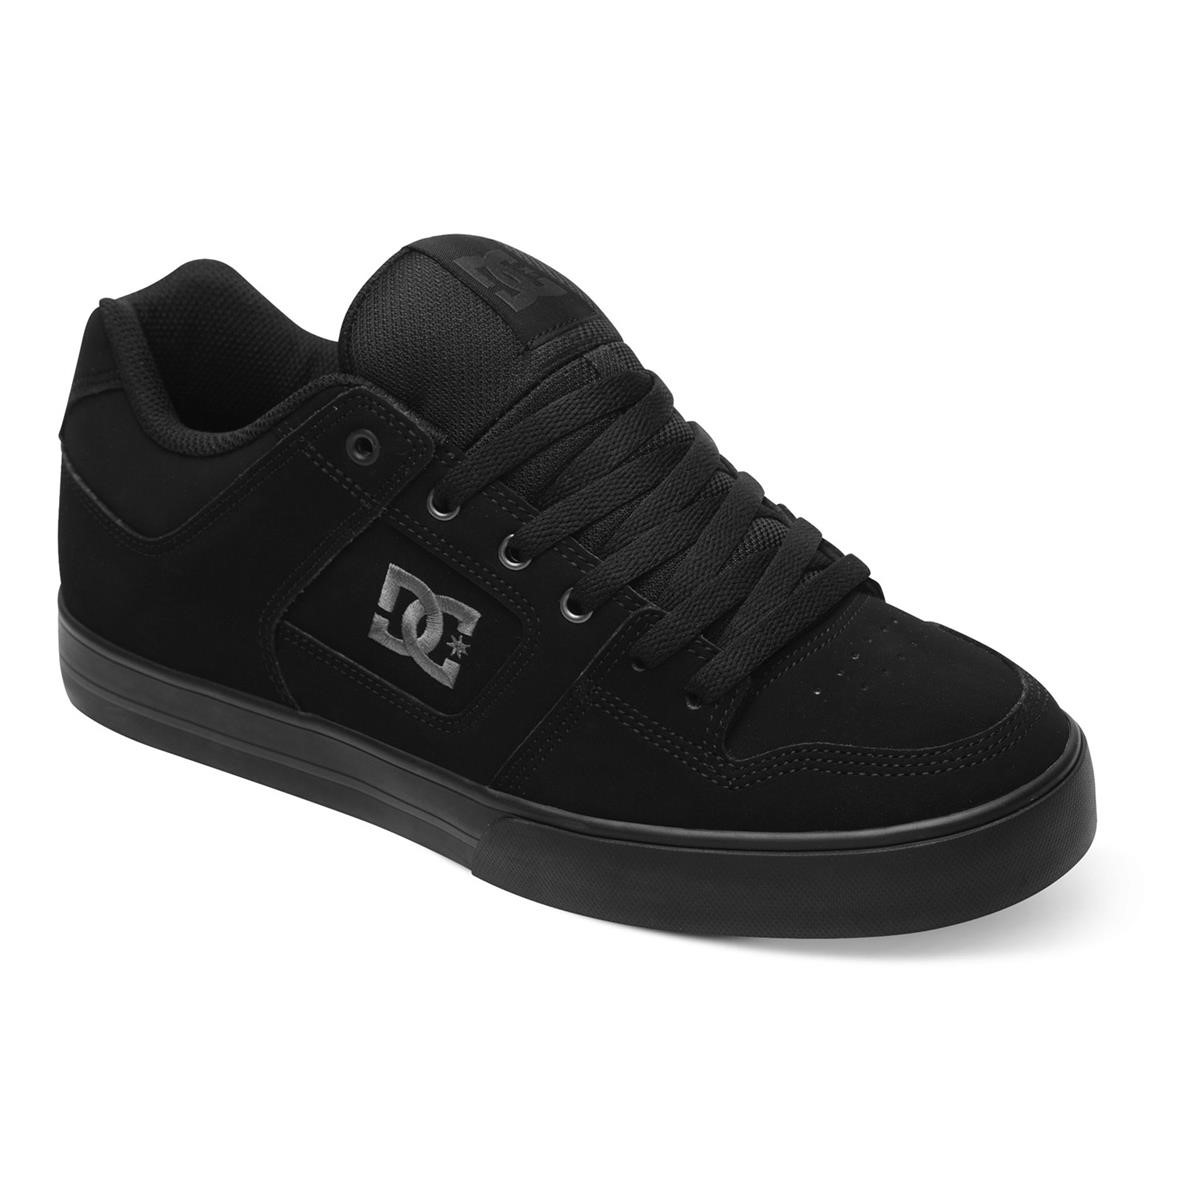 DC Chaussures Pure Black/Pirate Black